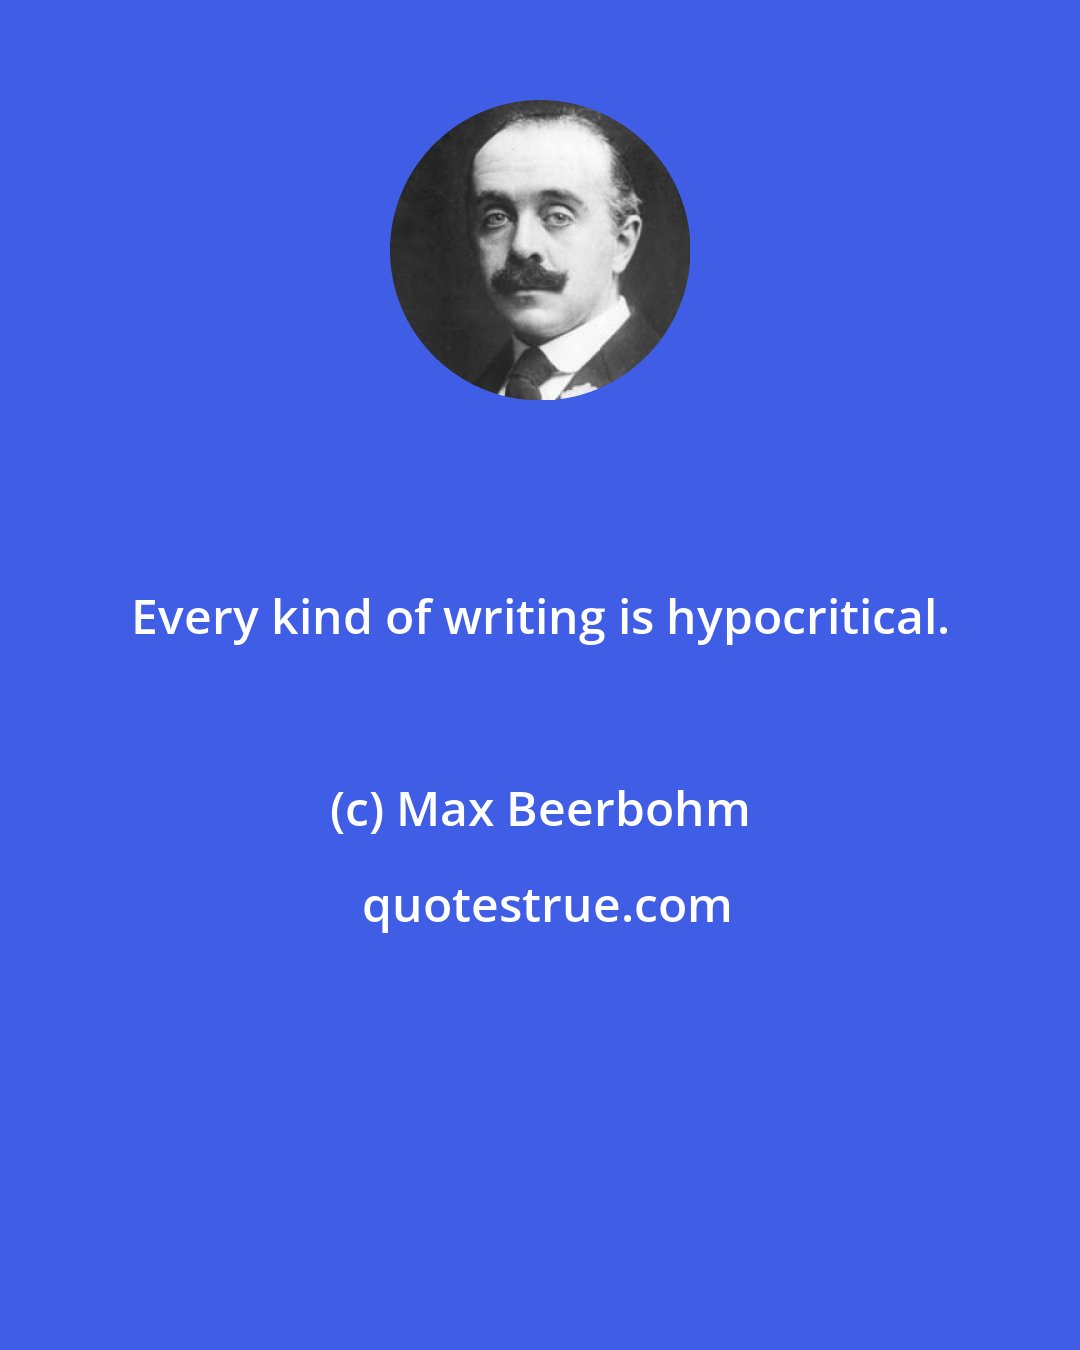 Max Beerbohm: Every kind of writing is hypocritical.